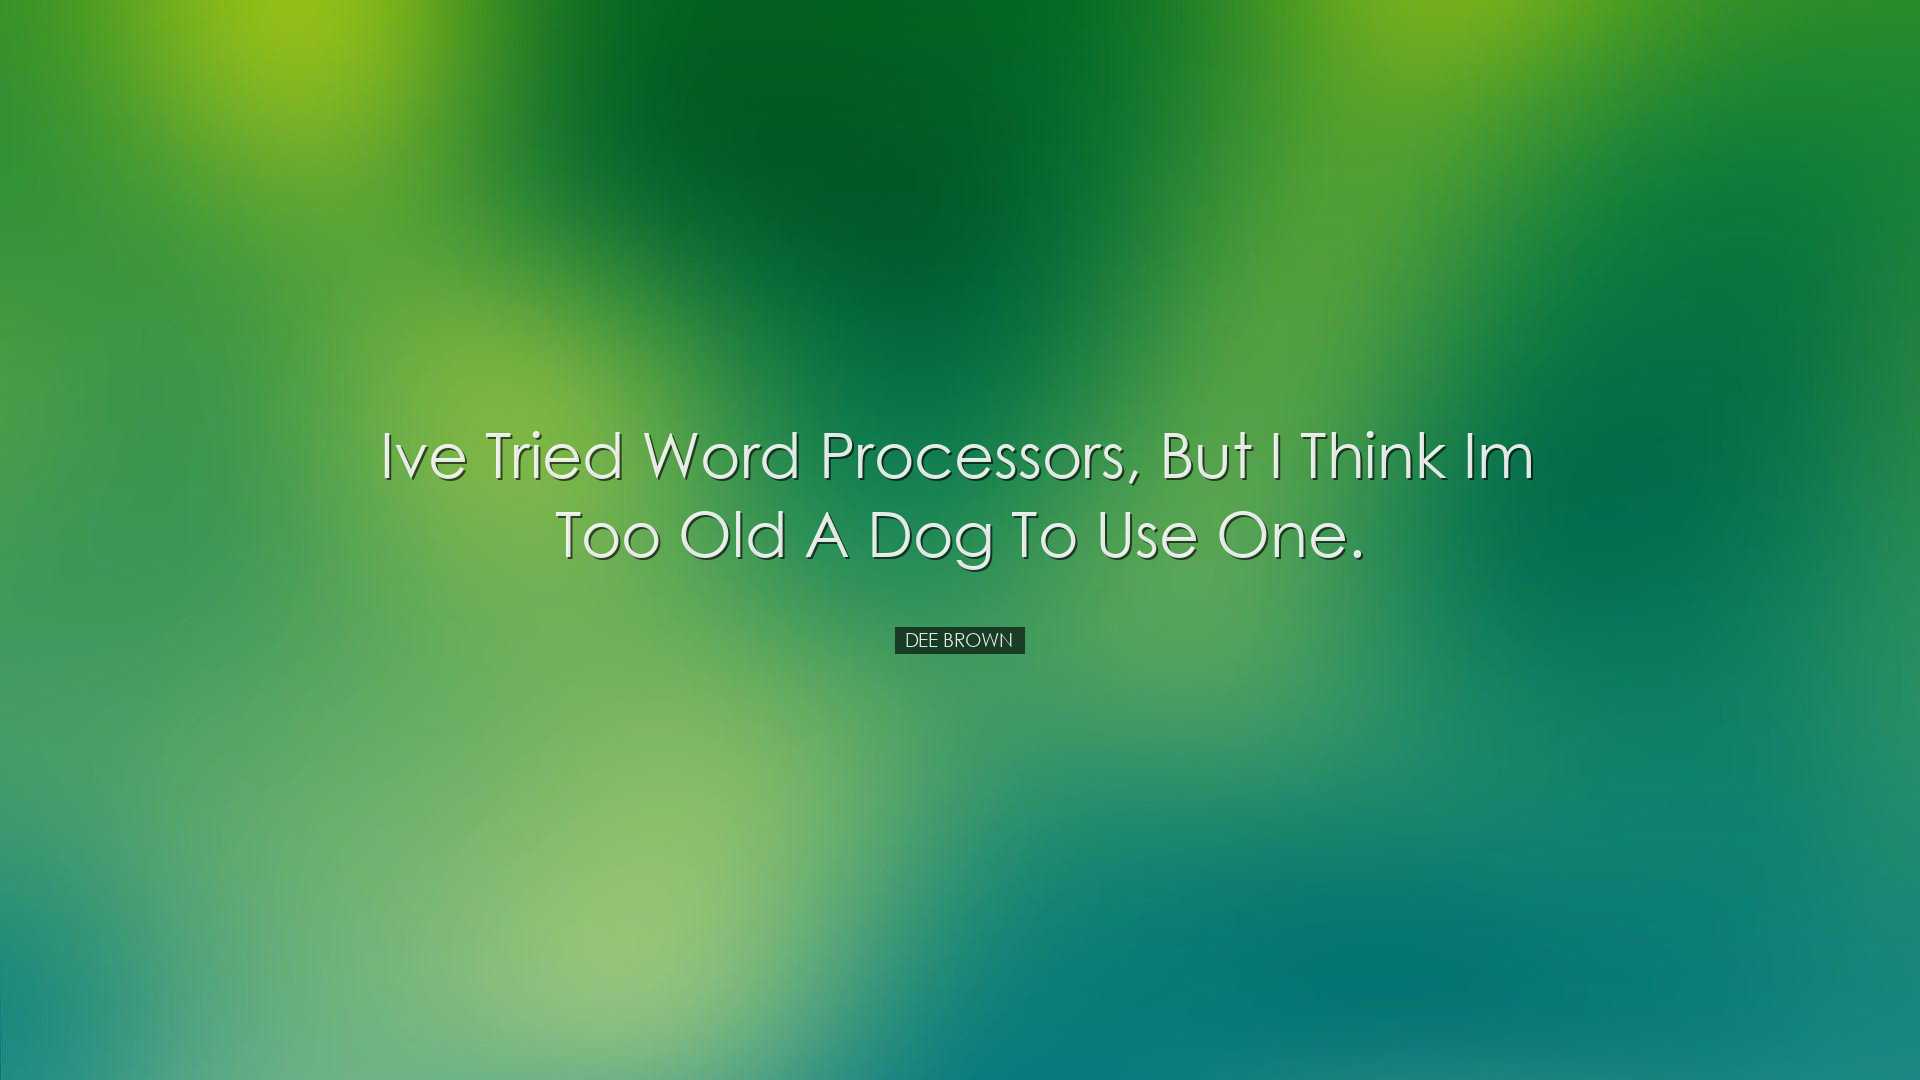 Ive tried word processors, but I think Im too old a dog to use one